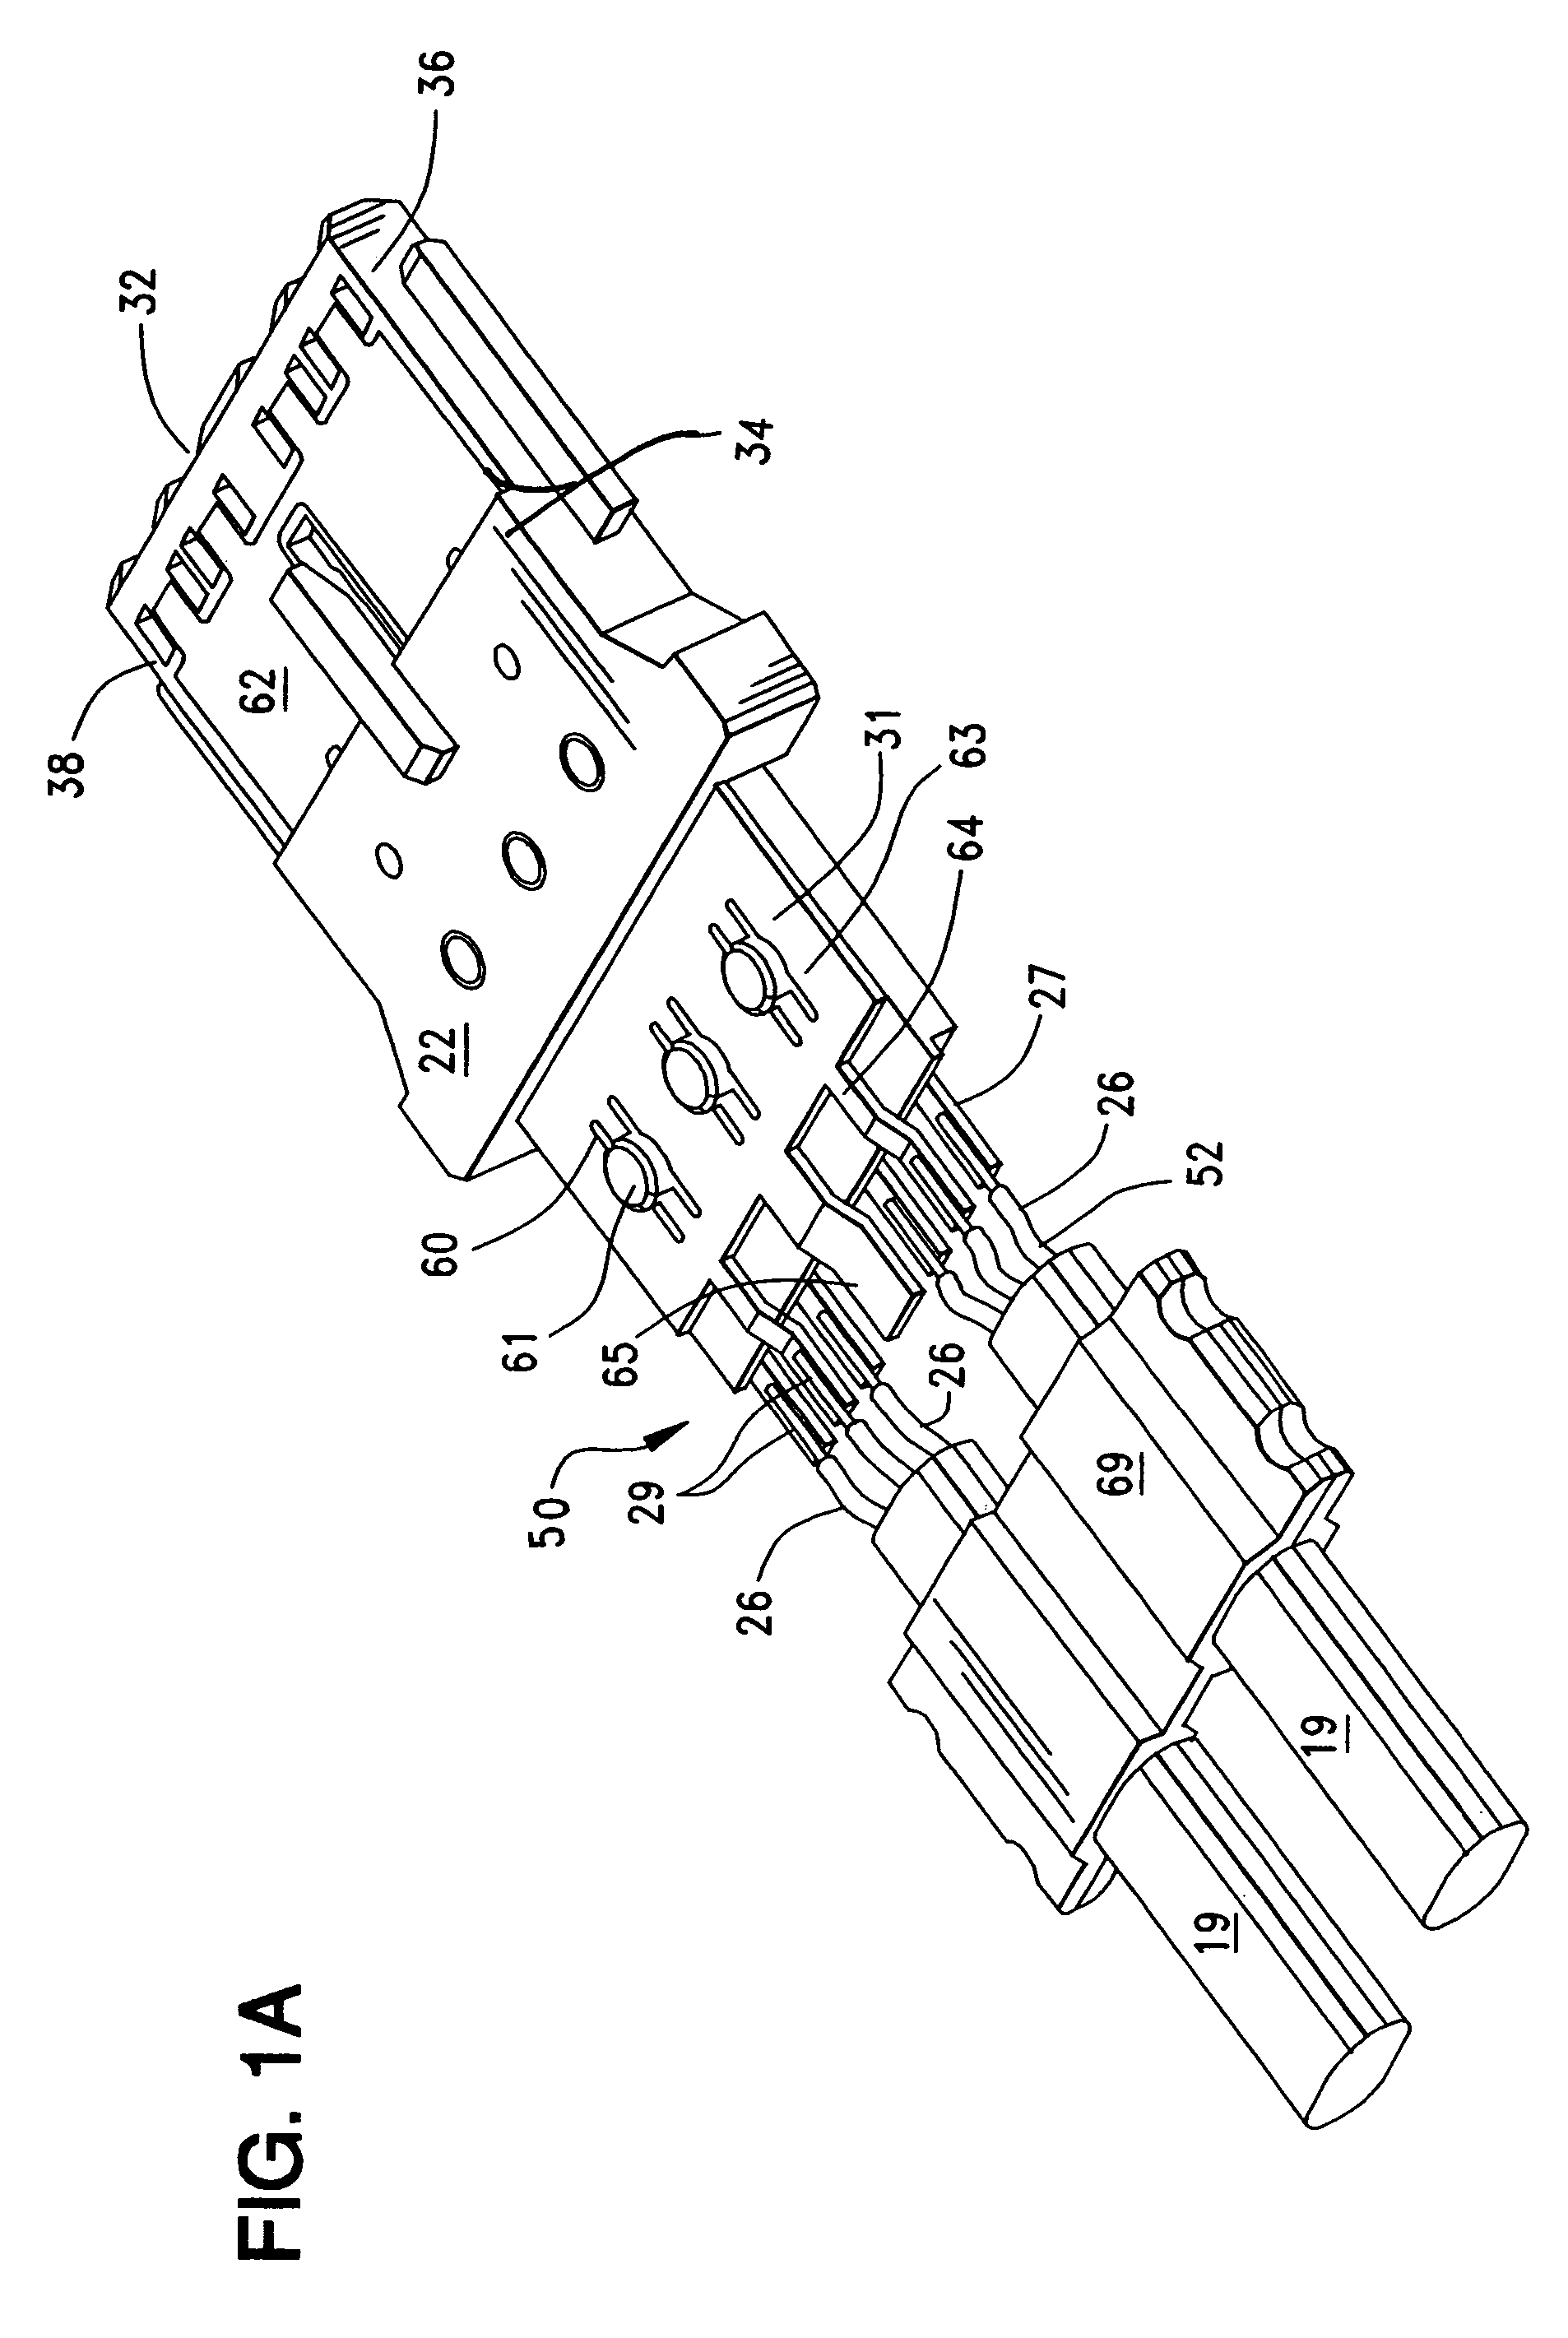 Cable connector with shielded termination area